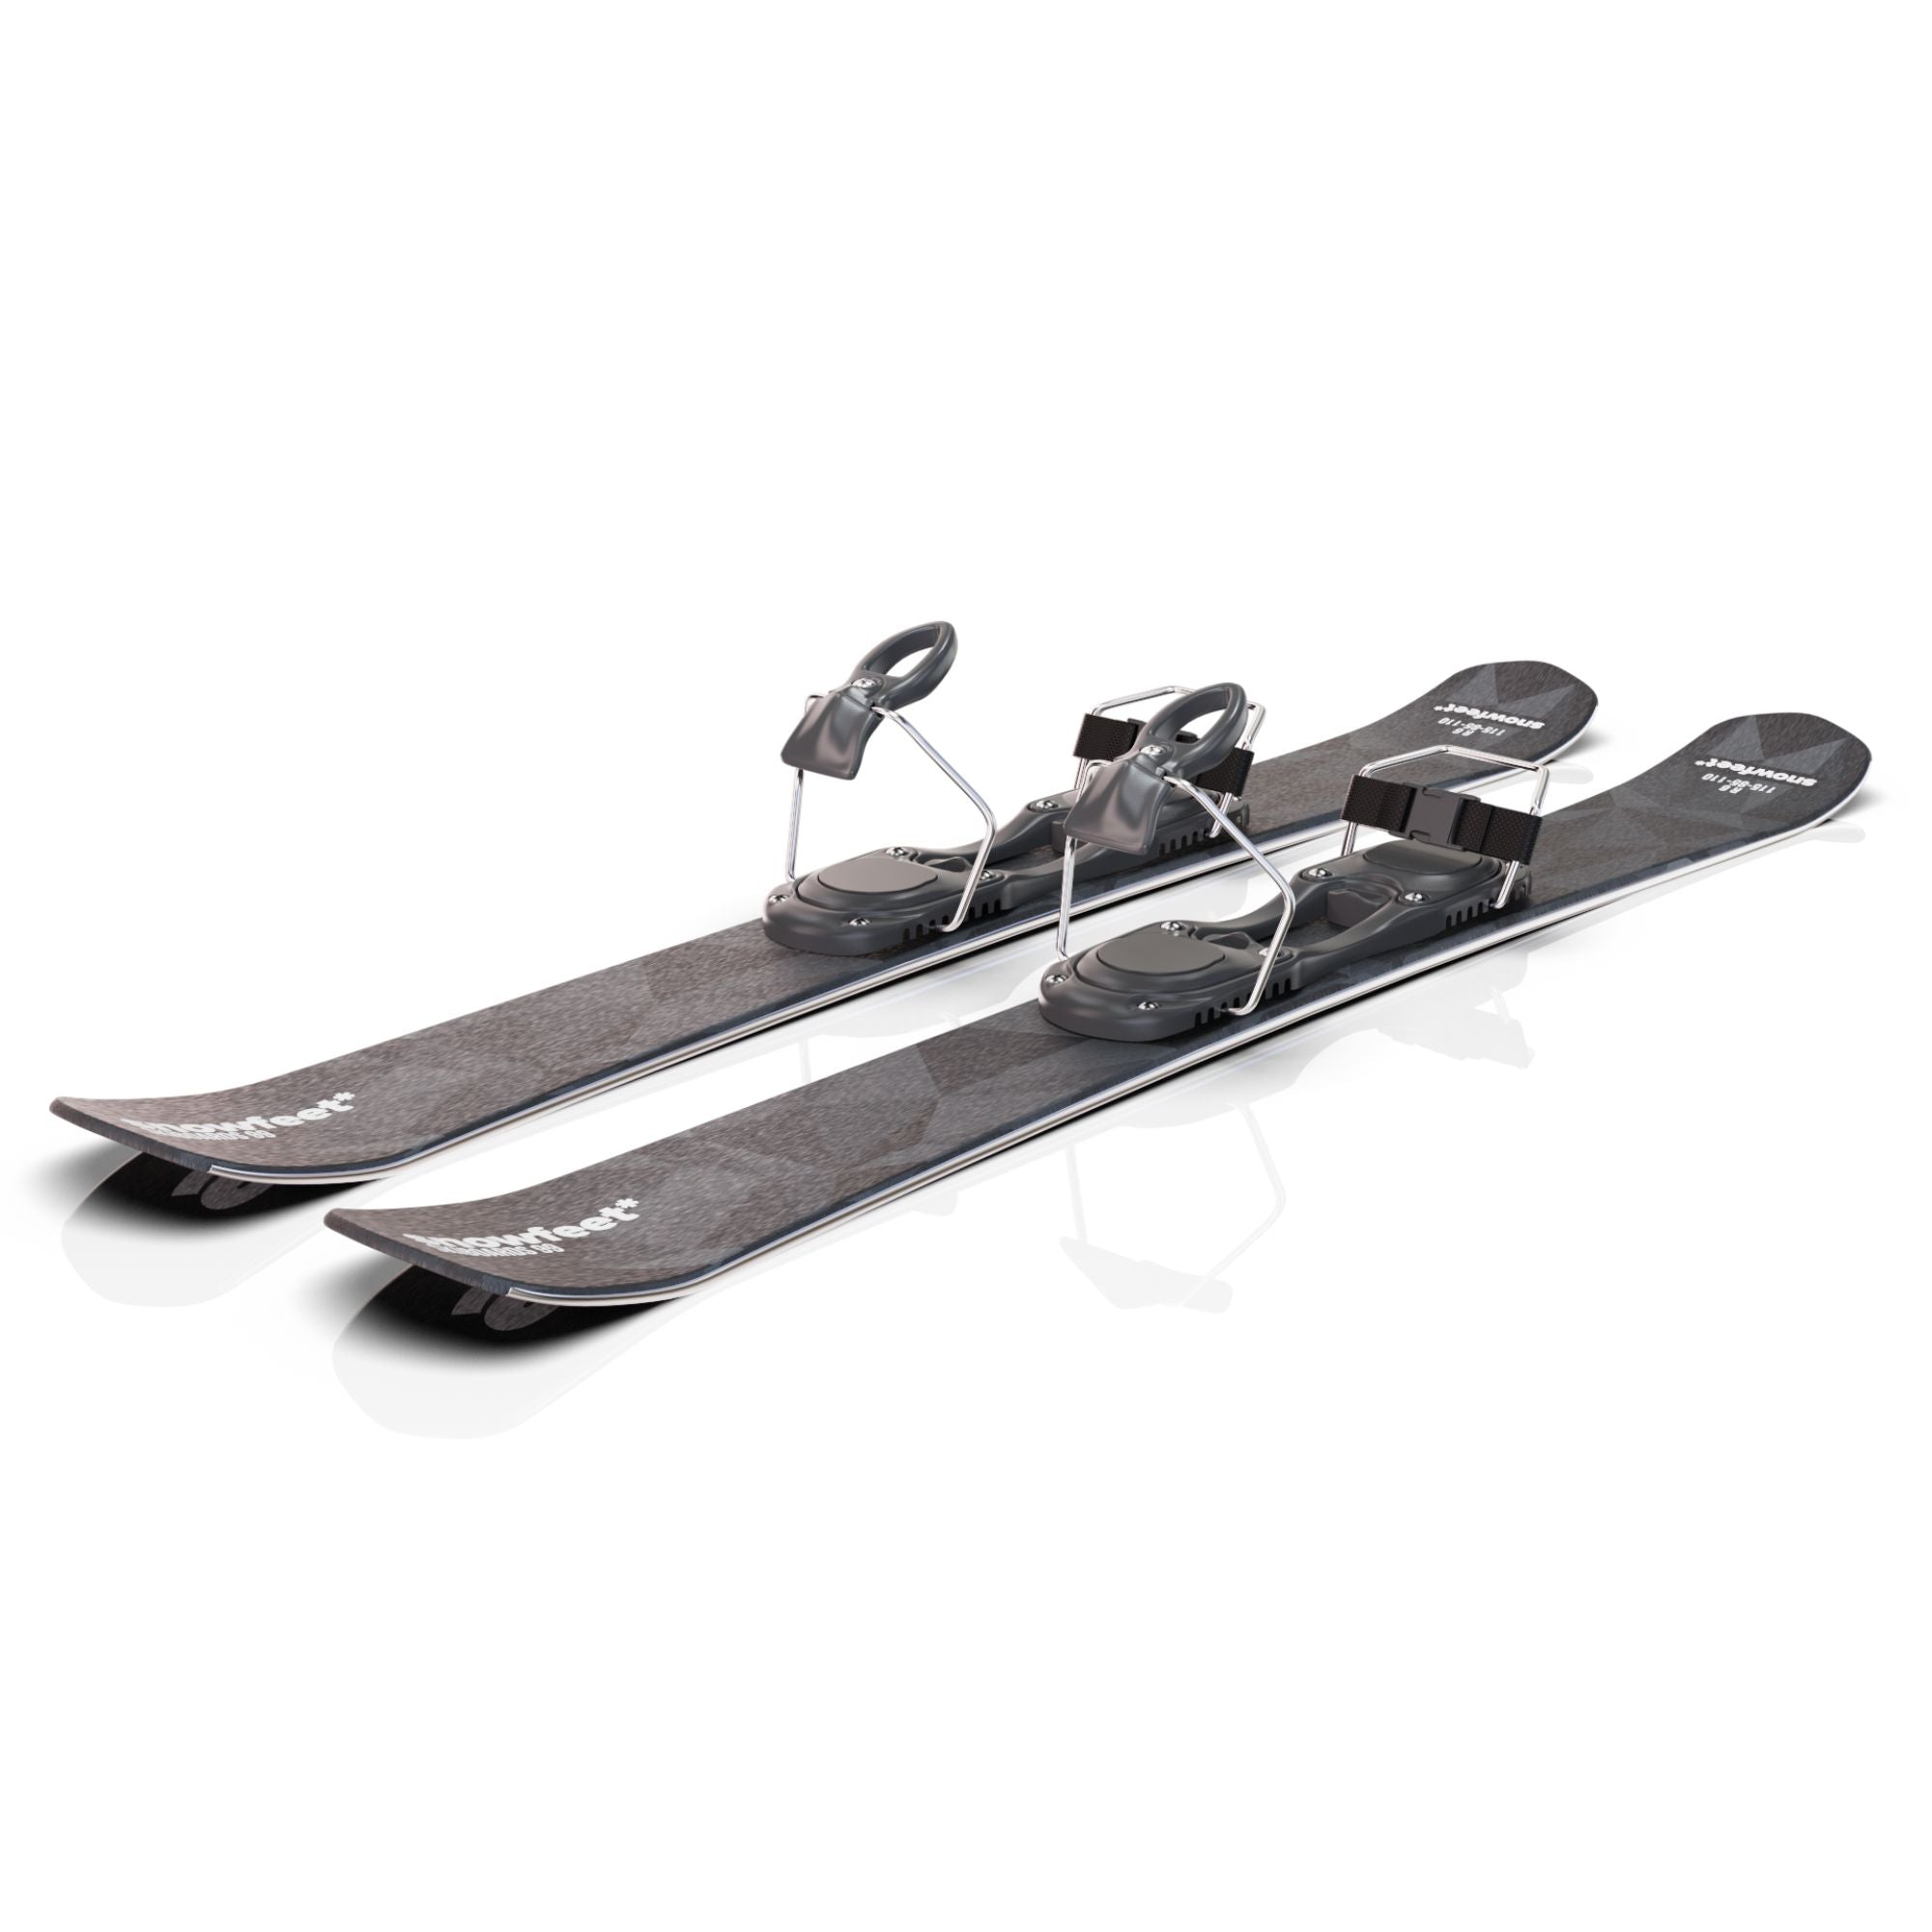 igennem Isaac Specialisere Snowfeet - Mini Skis - Official Website - Reviews | Price $149.9